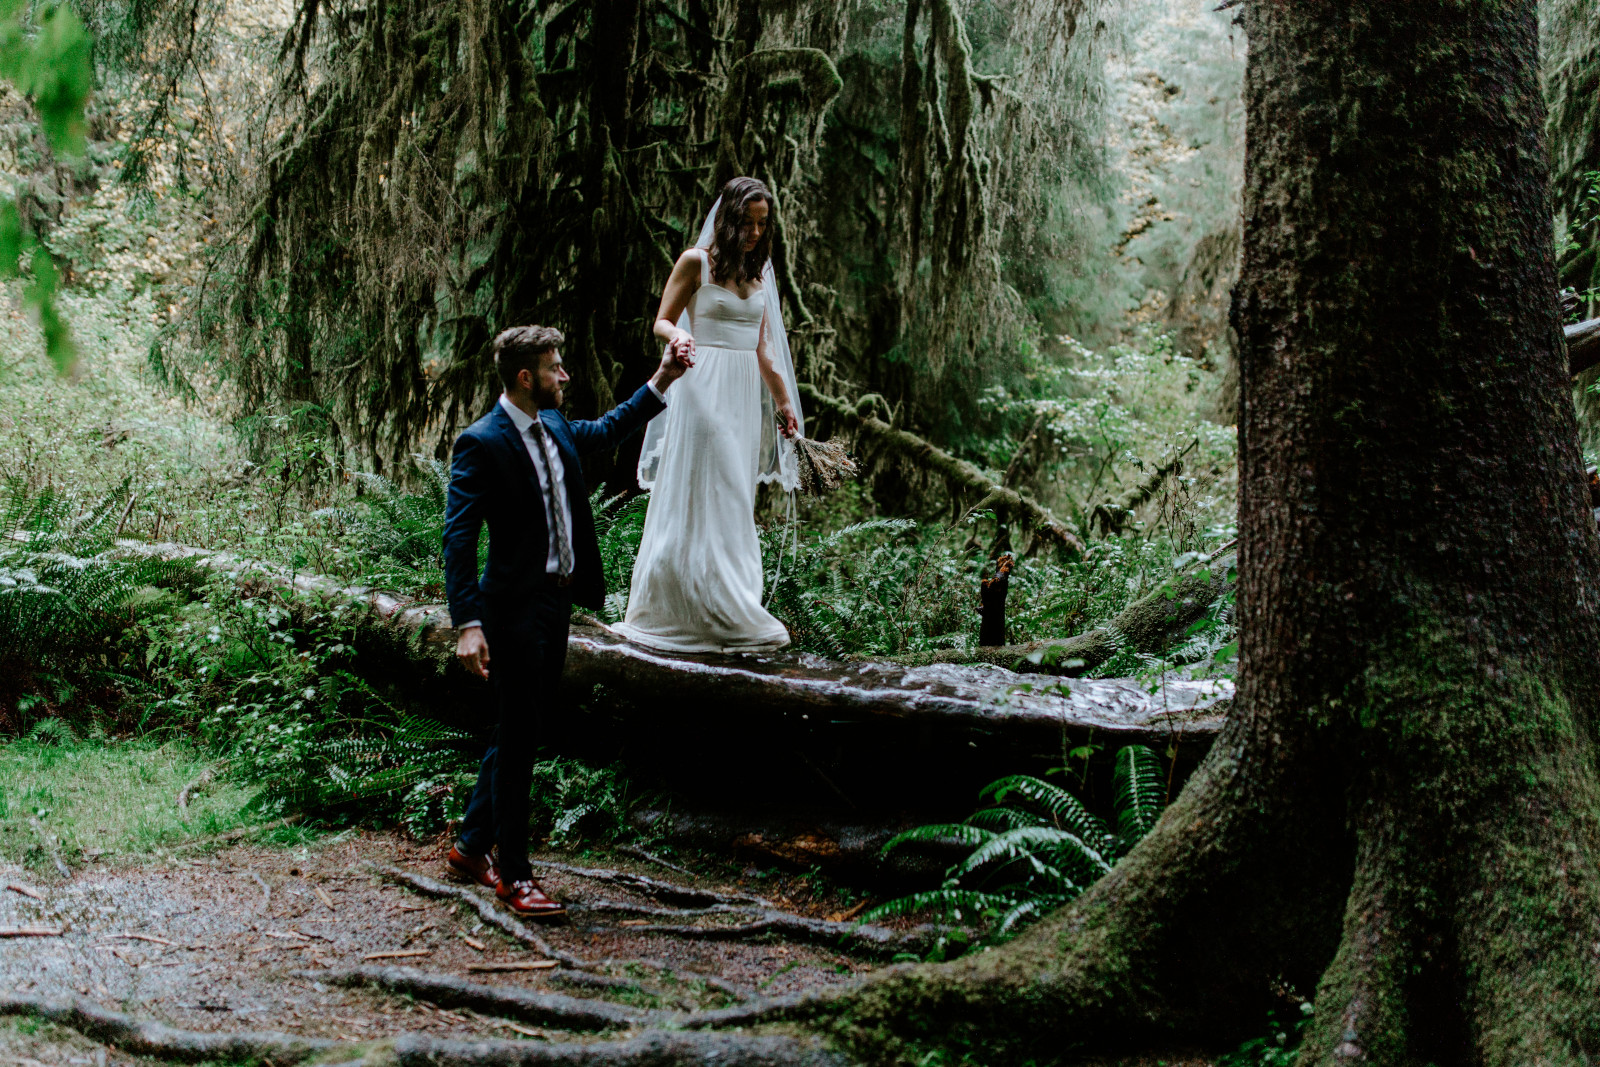 Corey helps Mollie walk on a tree. Elopement photography in the Olympic National Park by Sienna Plus Josh.